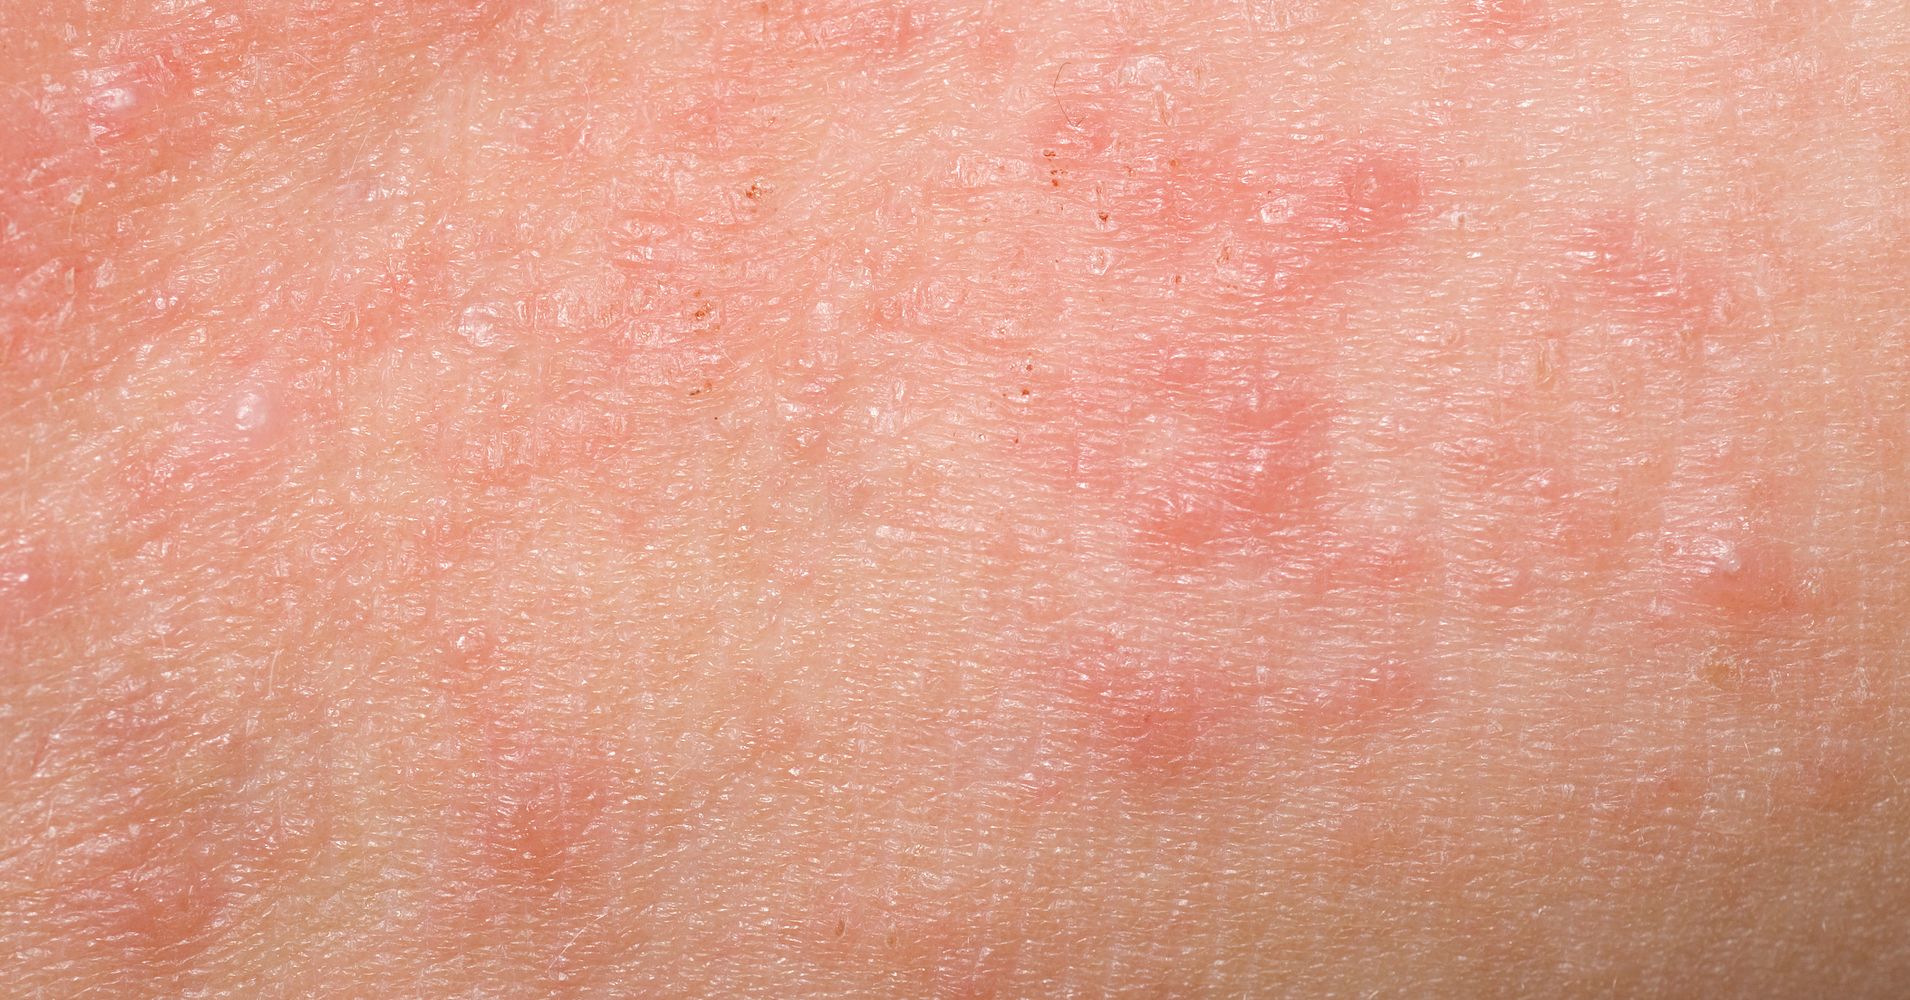 What Is Keratosis Pilaris And Why Does It Look Like Body Acne